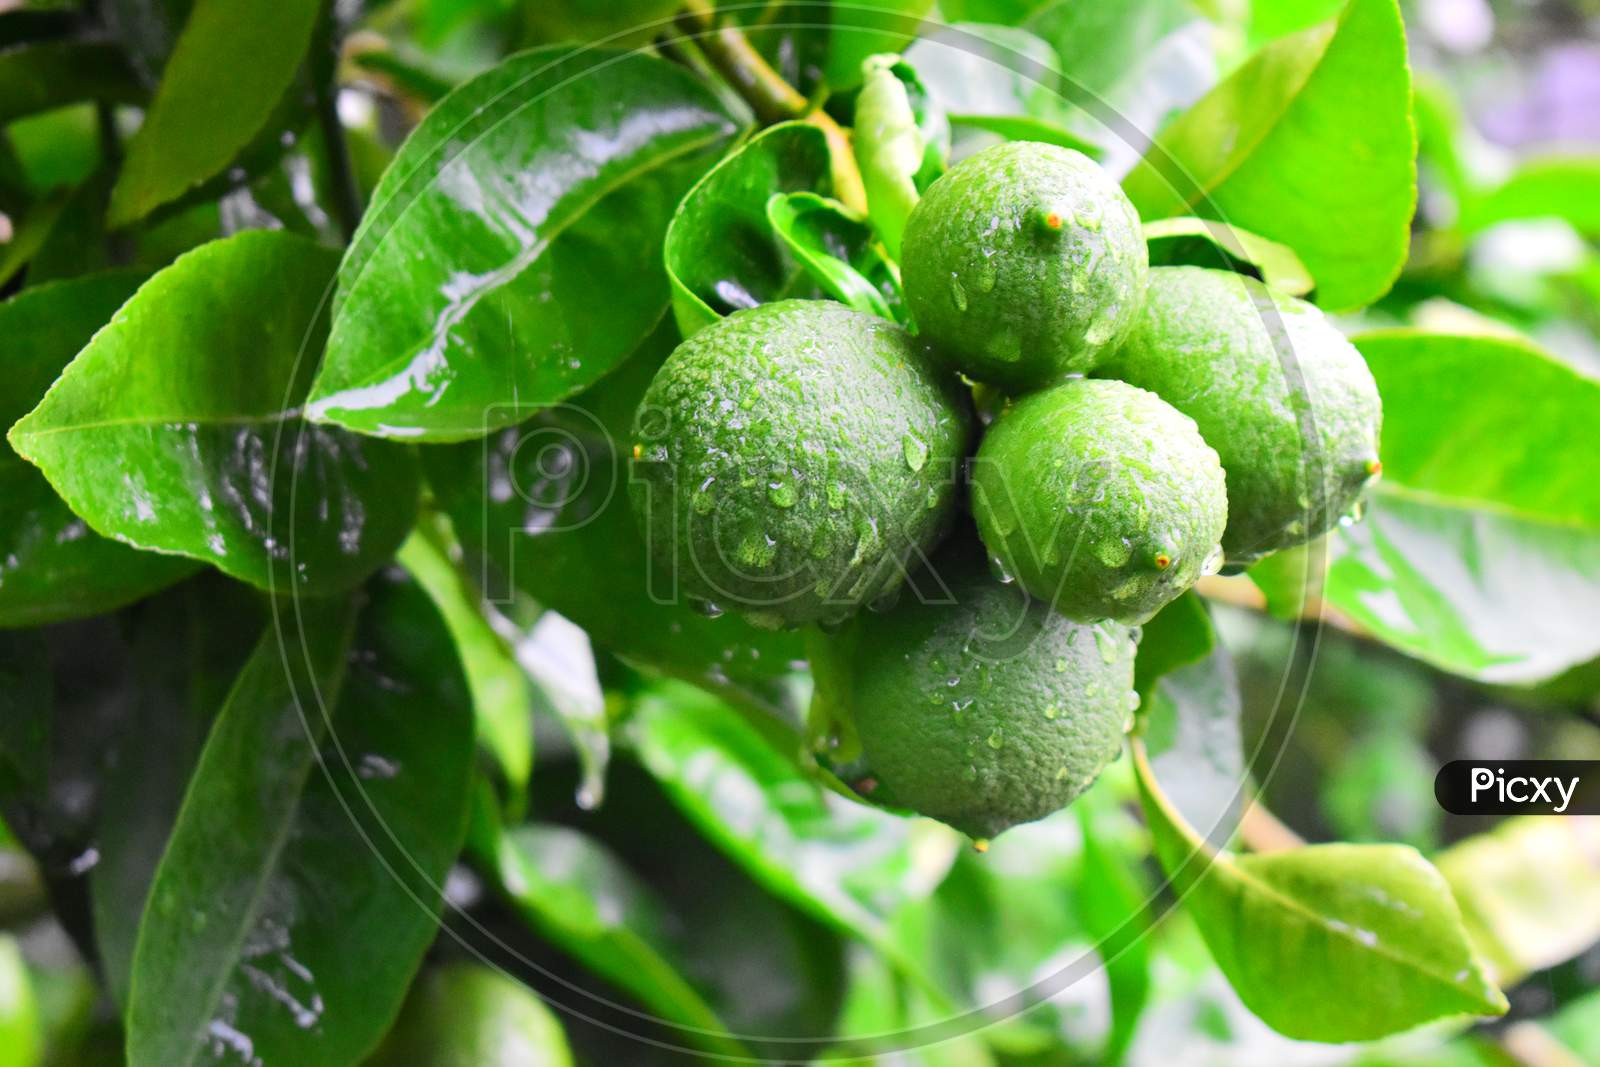 FRESH GREEN CITRUS FRUITS ON A TREE  BRANCH WITH WATER DROPLETS ON IT